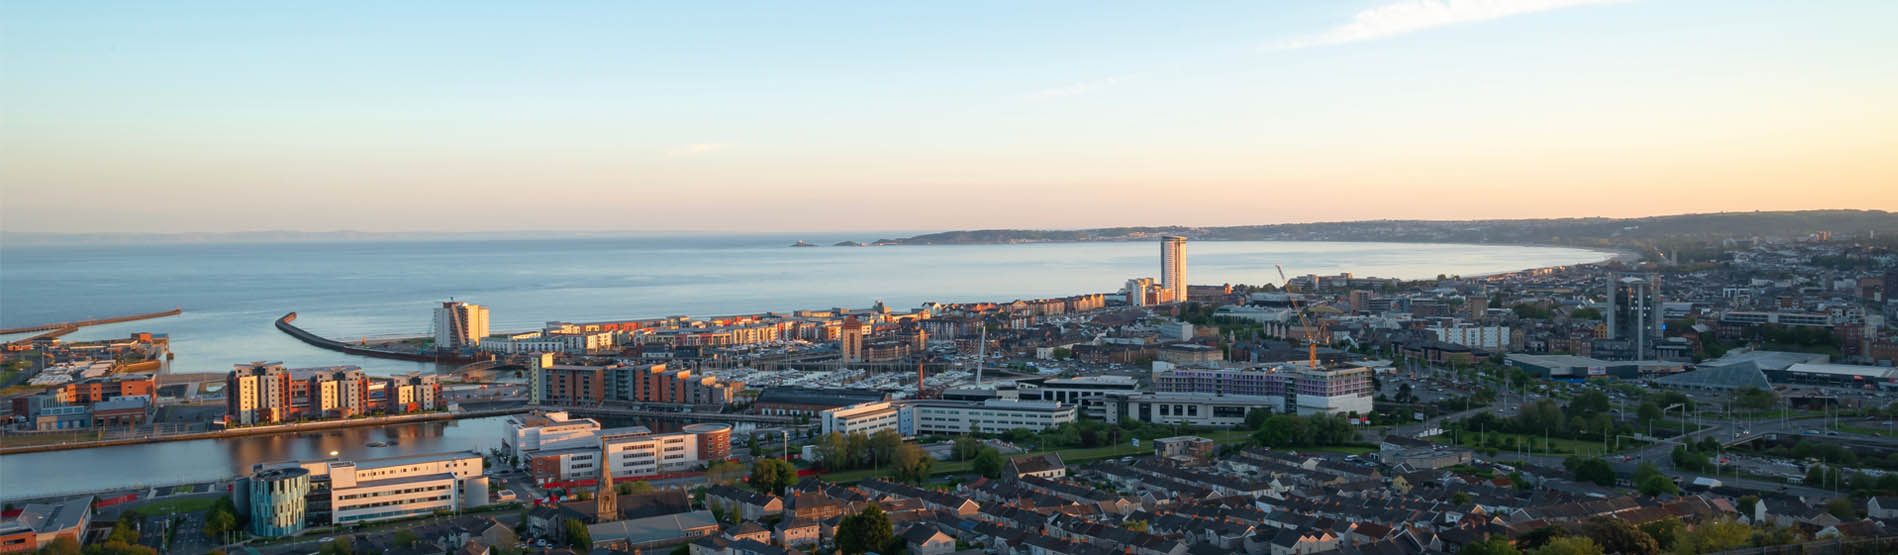 A wide angle photo of Swansea Bay